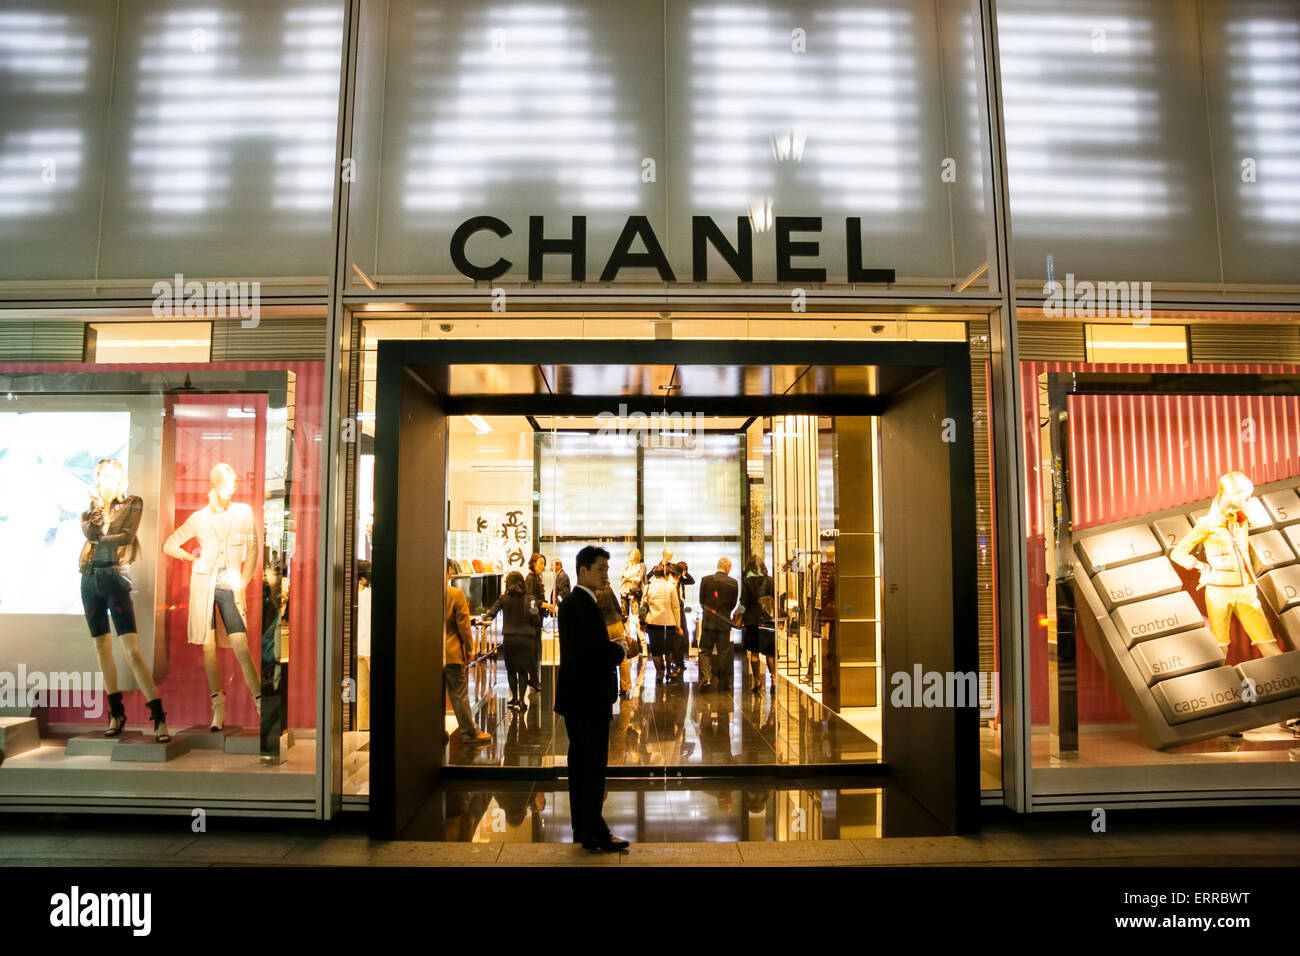 The Chanel perfume store in the Ginza, Tokyo. Evening, exterior of